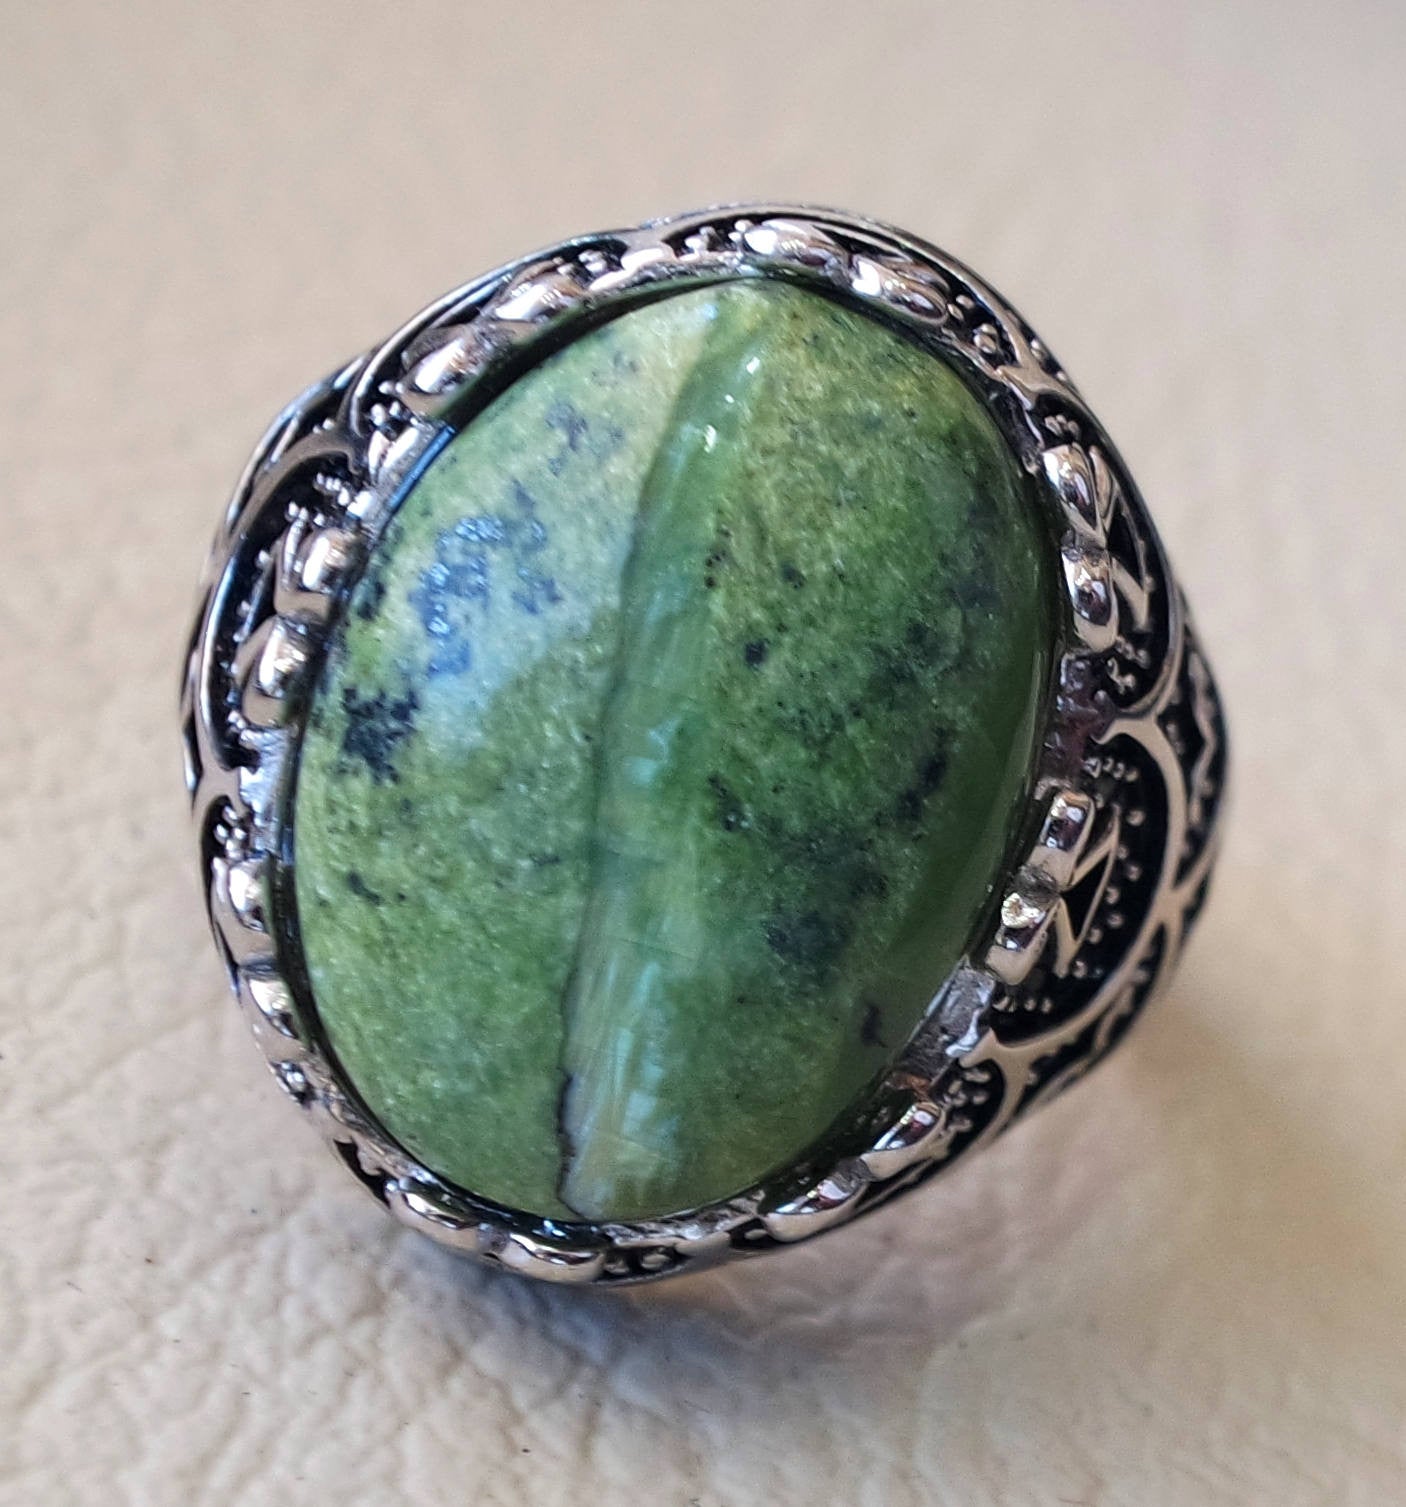 green swiss opal huge natural stone men ring sterling silver 925 stunning genuine oval gem ottoman style jewelry all sizes